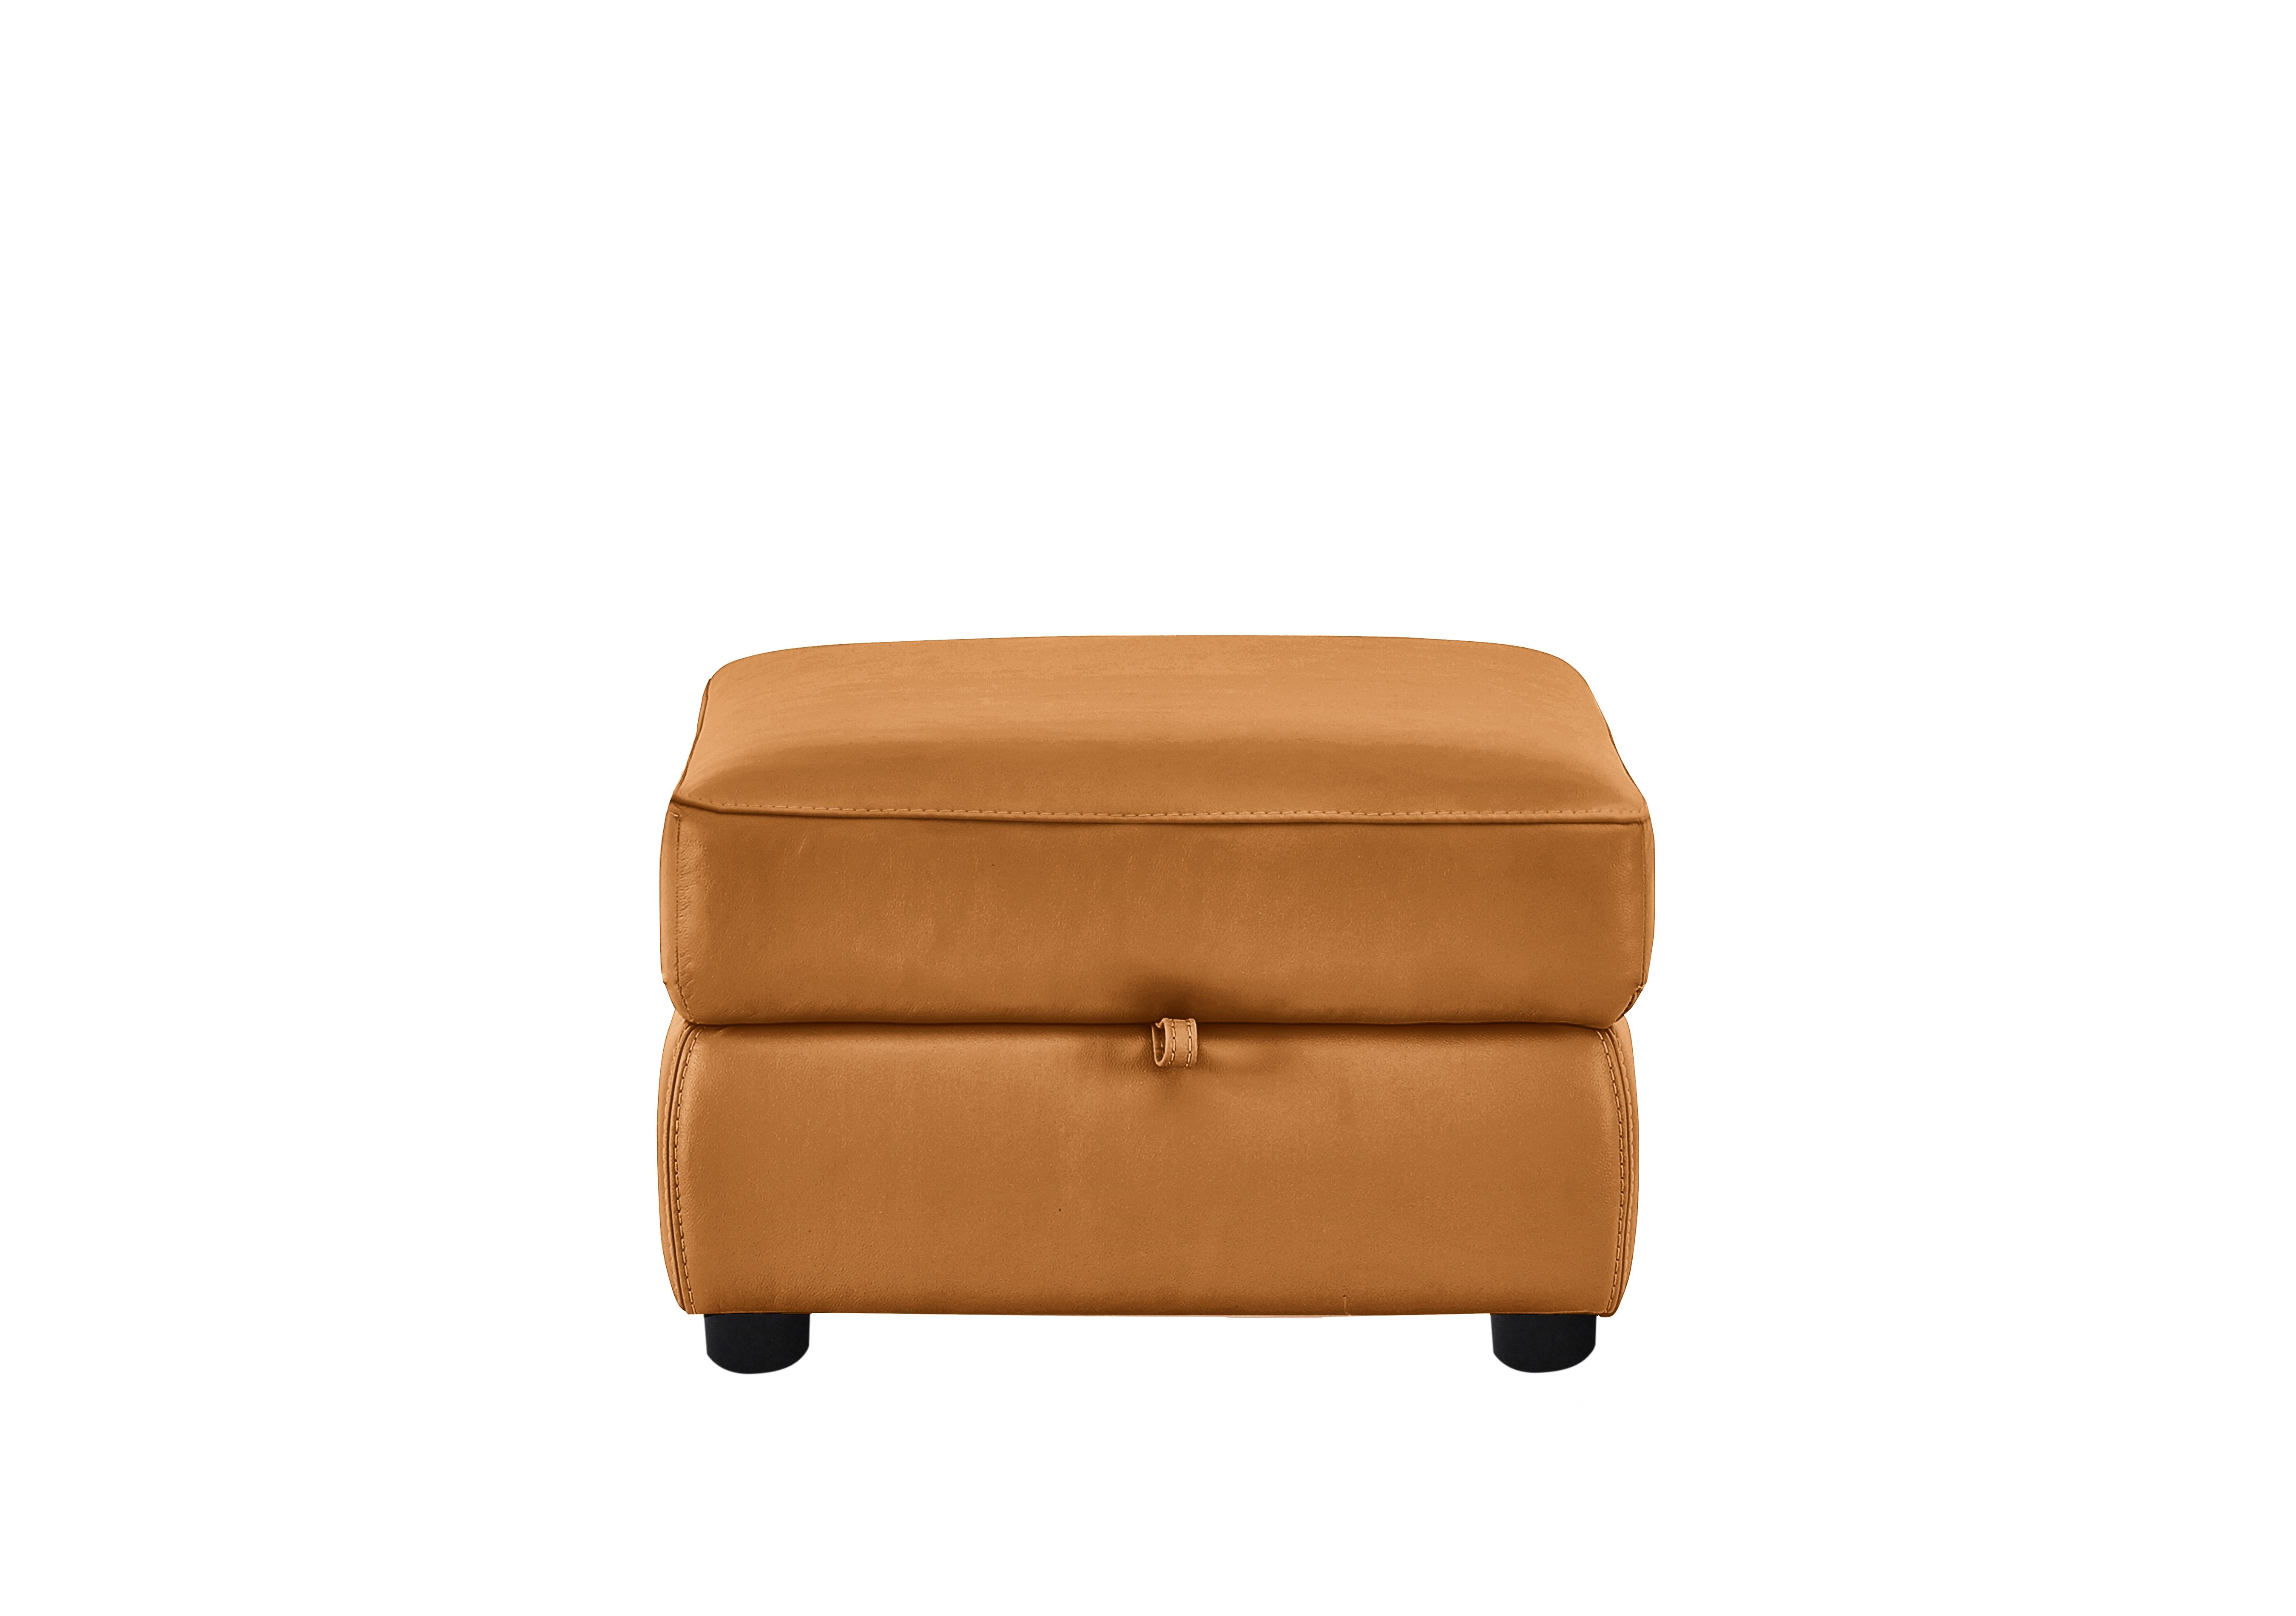 Snug Leather Storage Footstool in Bv-335e Honey Yellow on Furniture Village